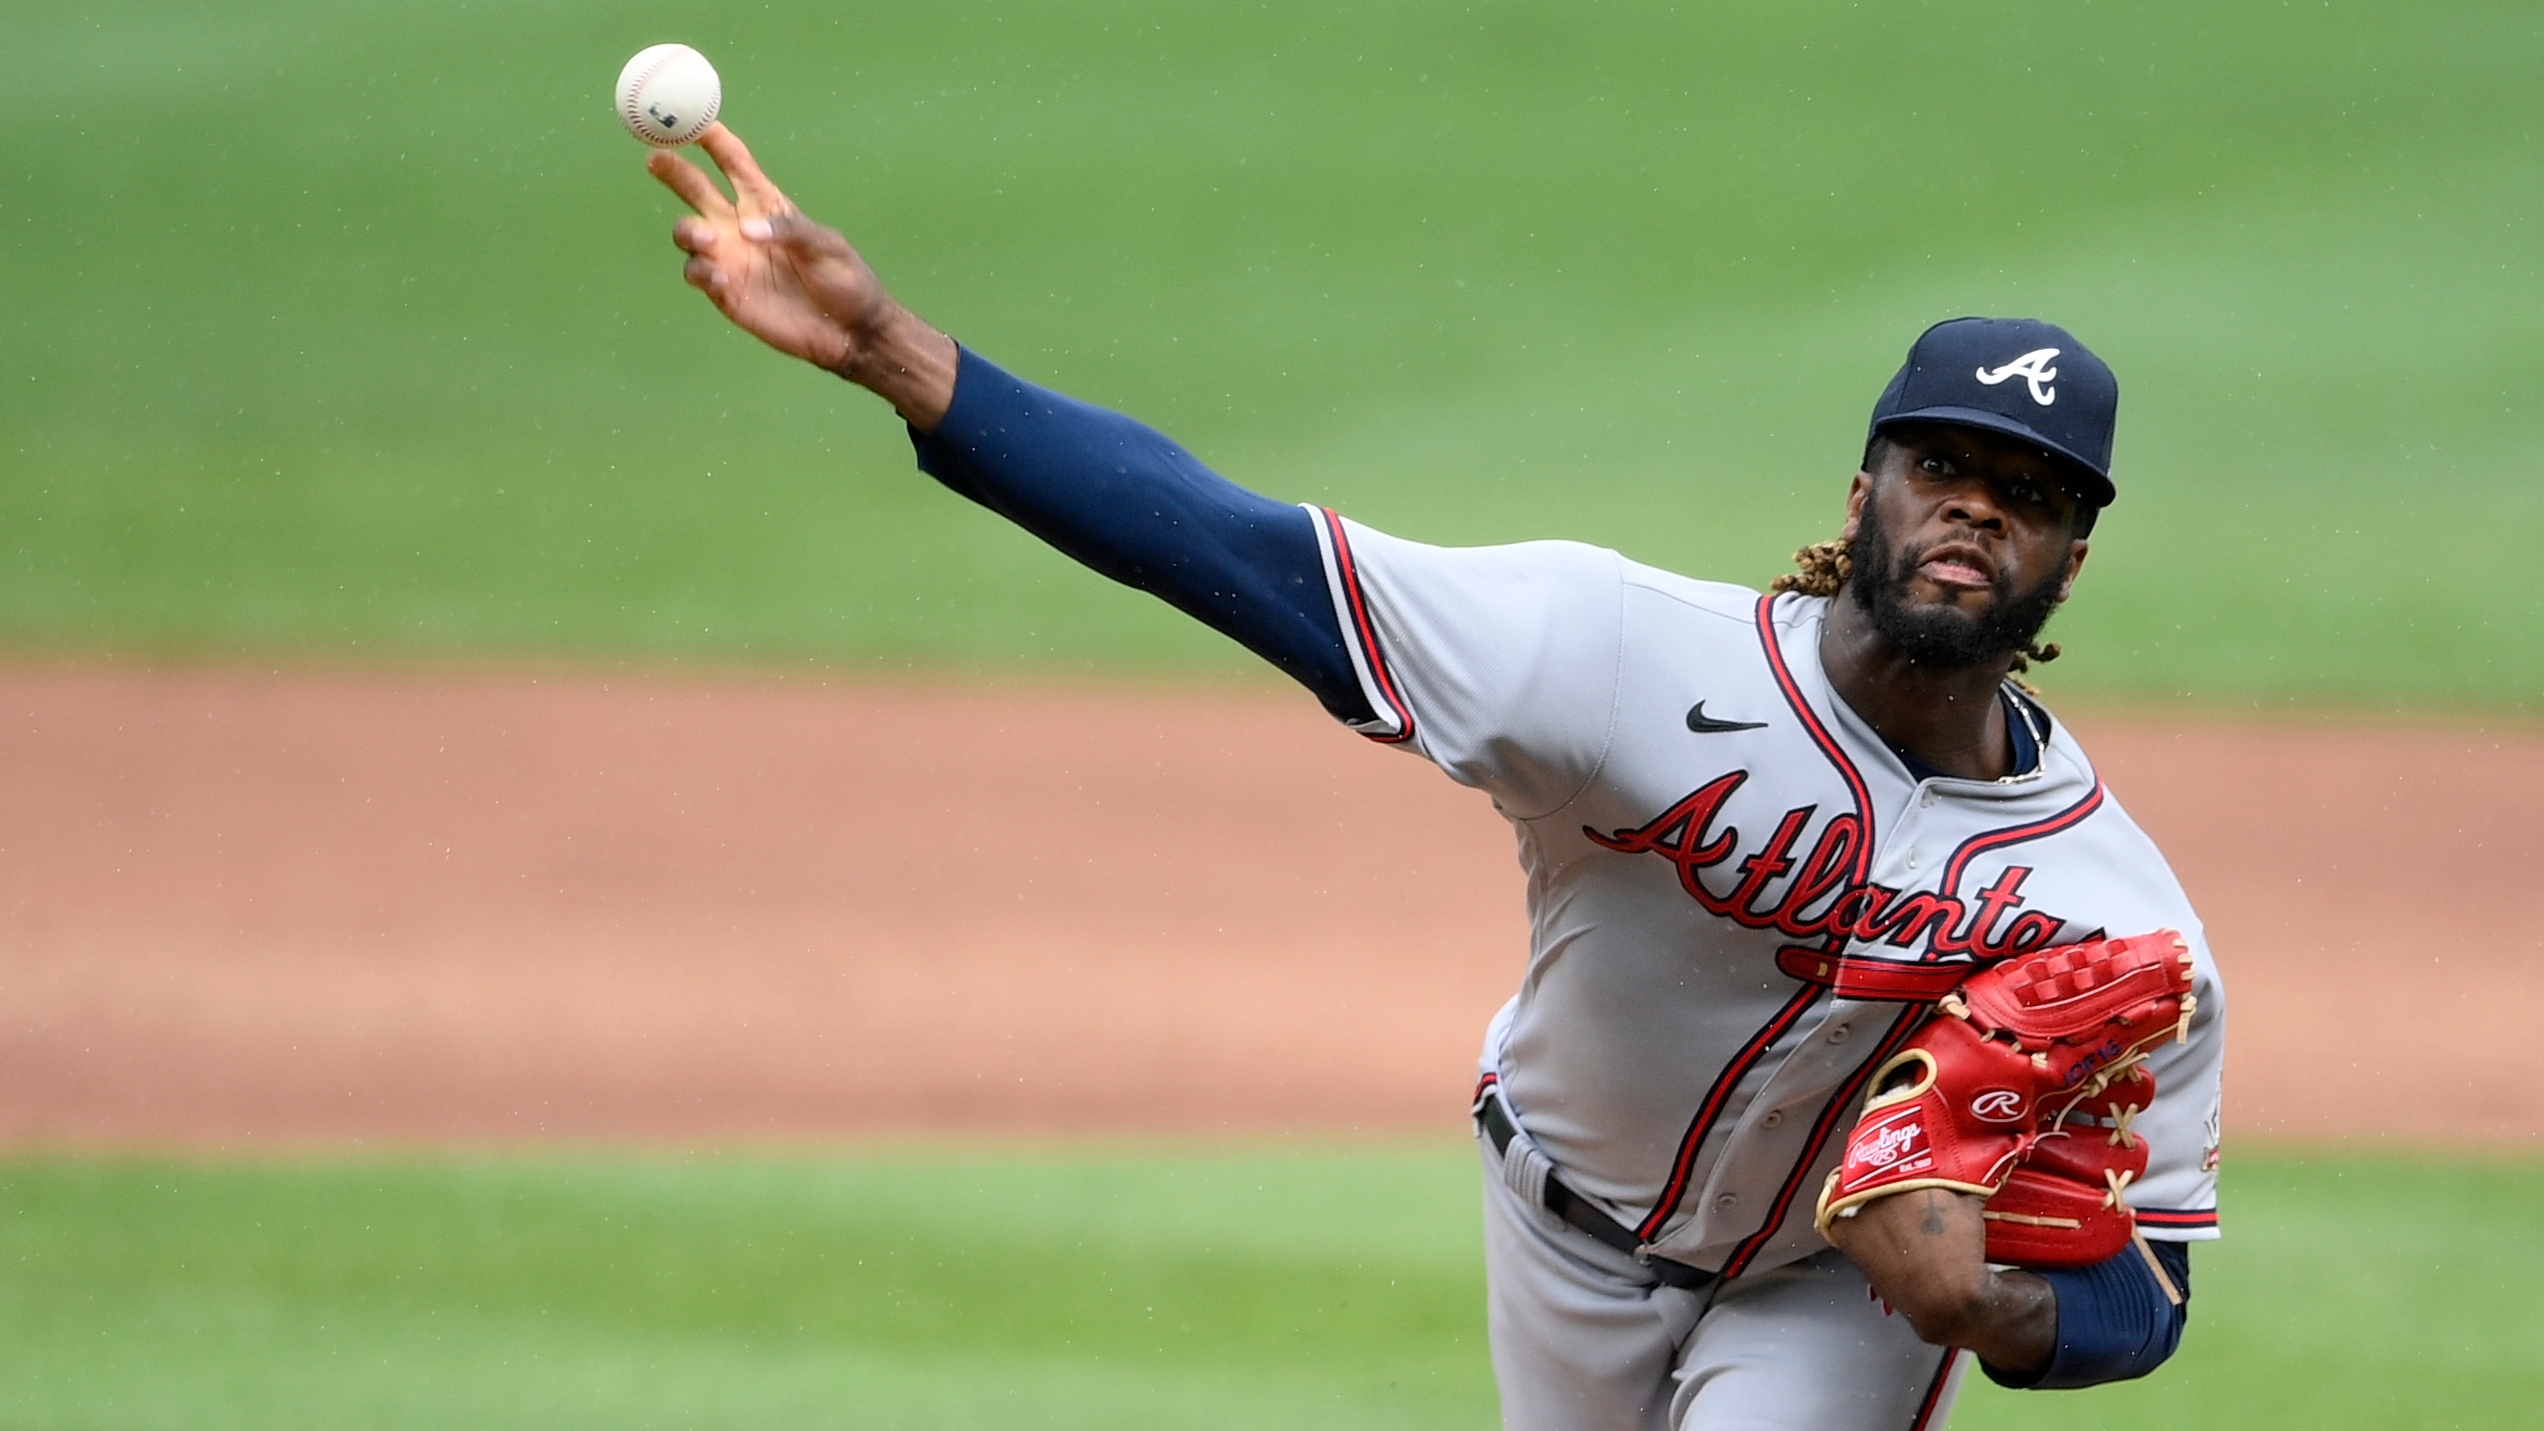 Touki Toussaint likely to start this weekend as Braves expand rotation